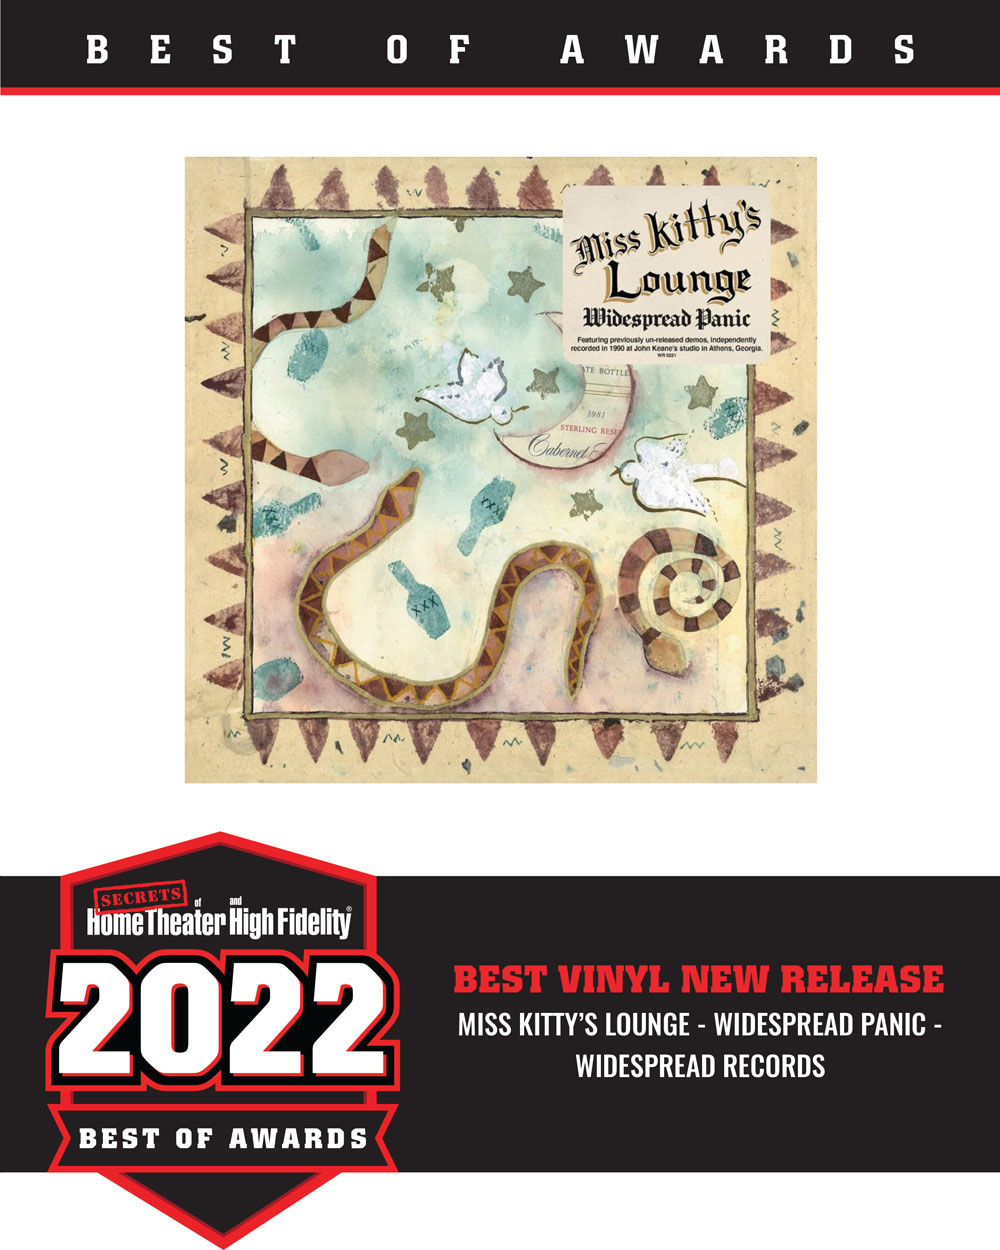 Miss Kitty's Lounge - Widespread Panic - Widespread Records Best of 2022 Award